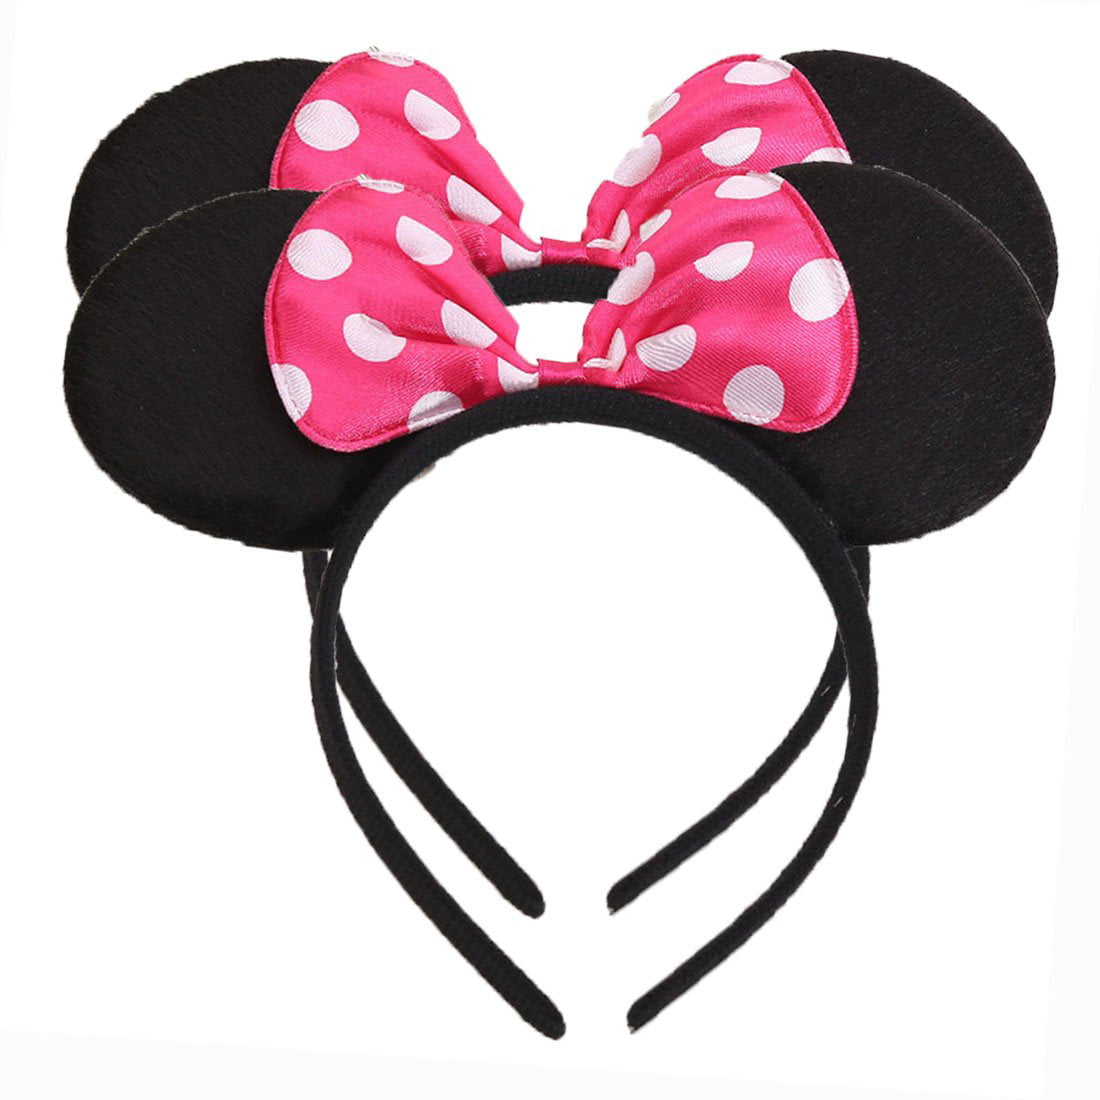 Red Polka Dot Bow Minnie Mouse Ears Headband Black Party Favors Costume Mickey